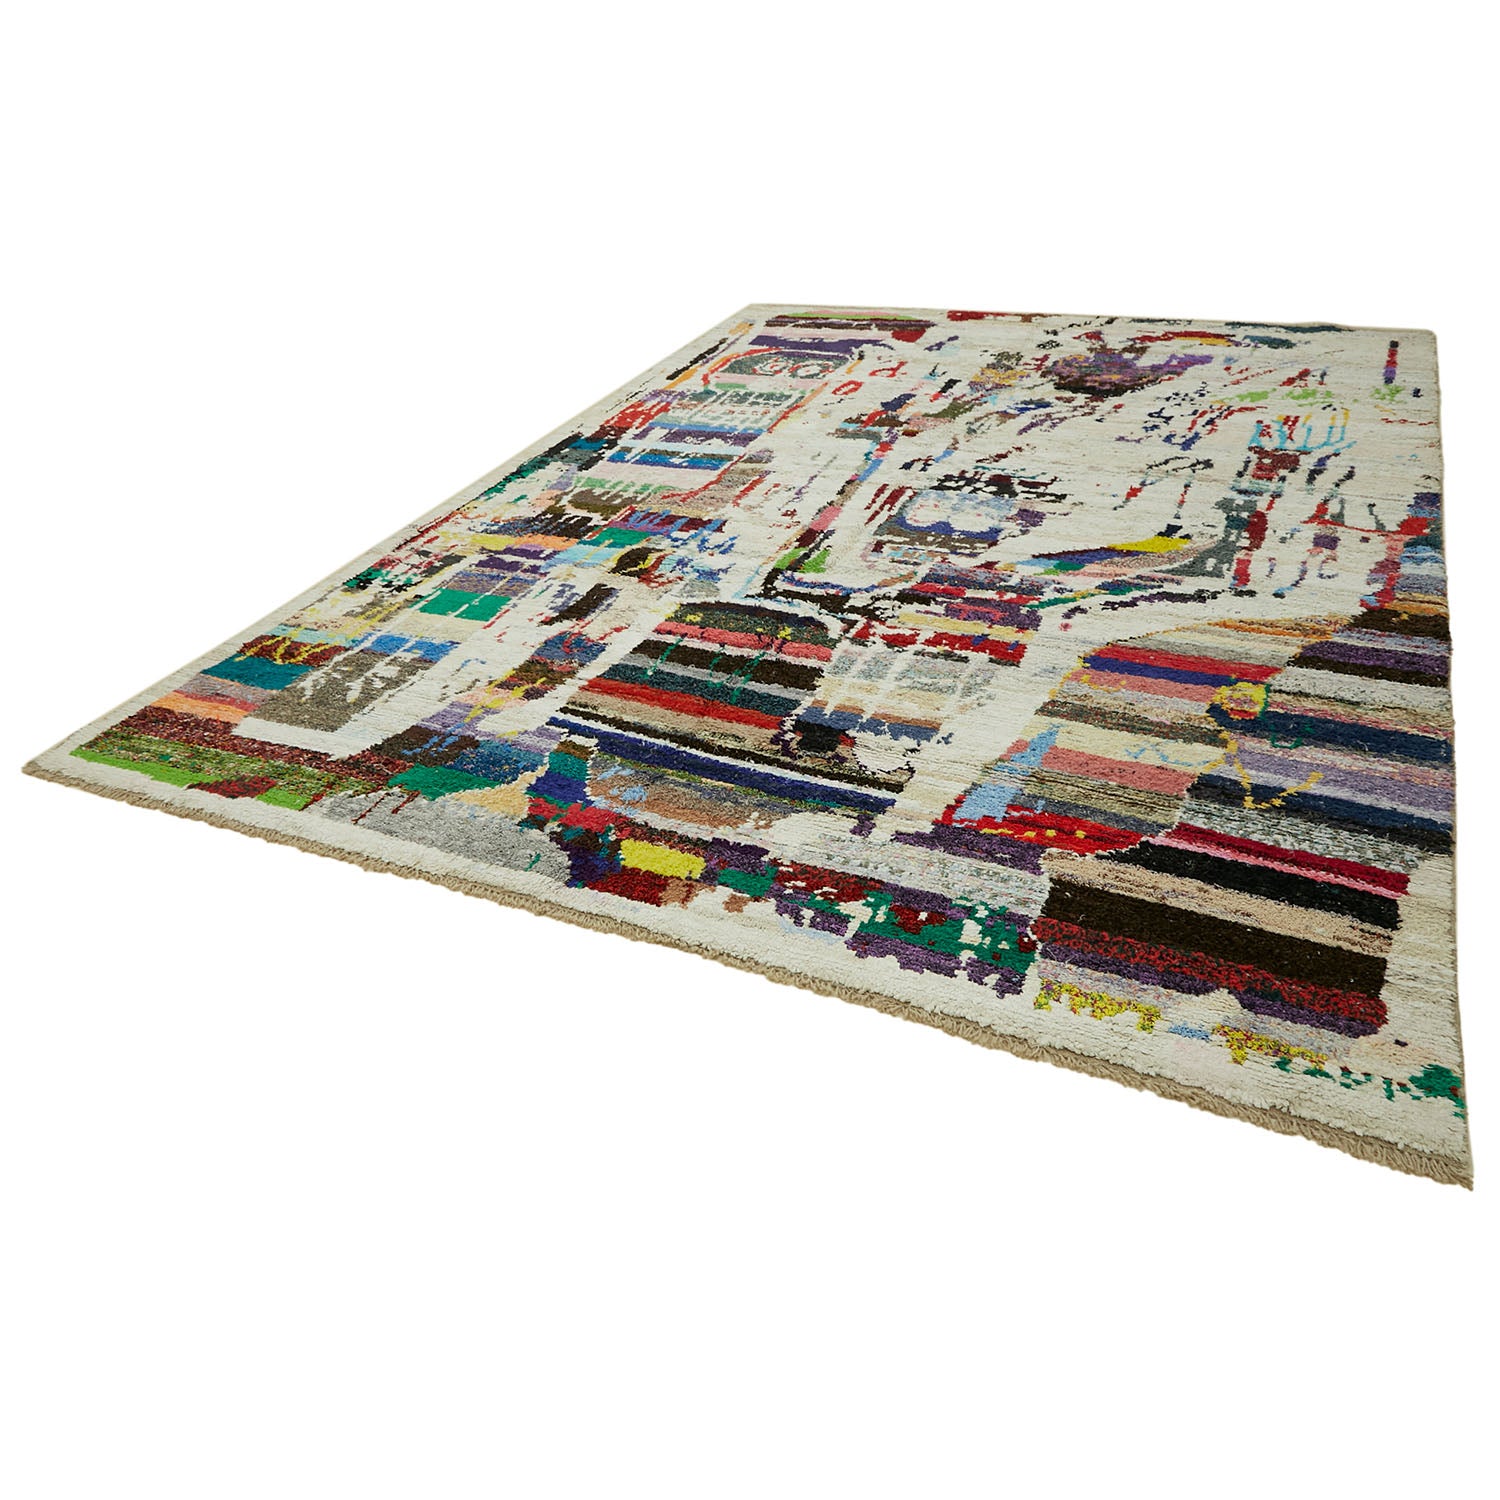 Contemporary Wool Rug - 9'6" x 13'4" Default Title